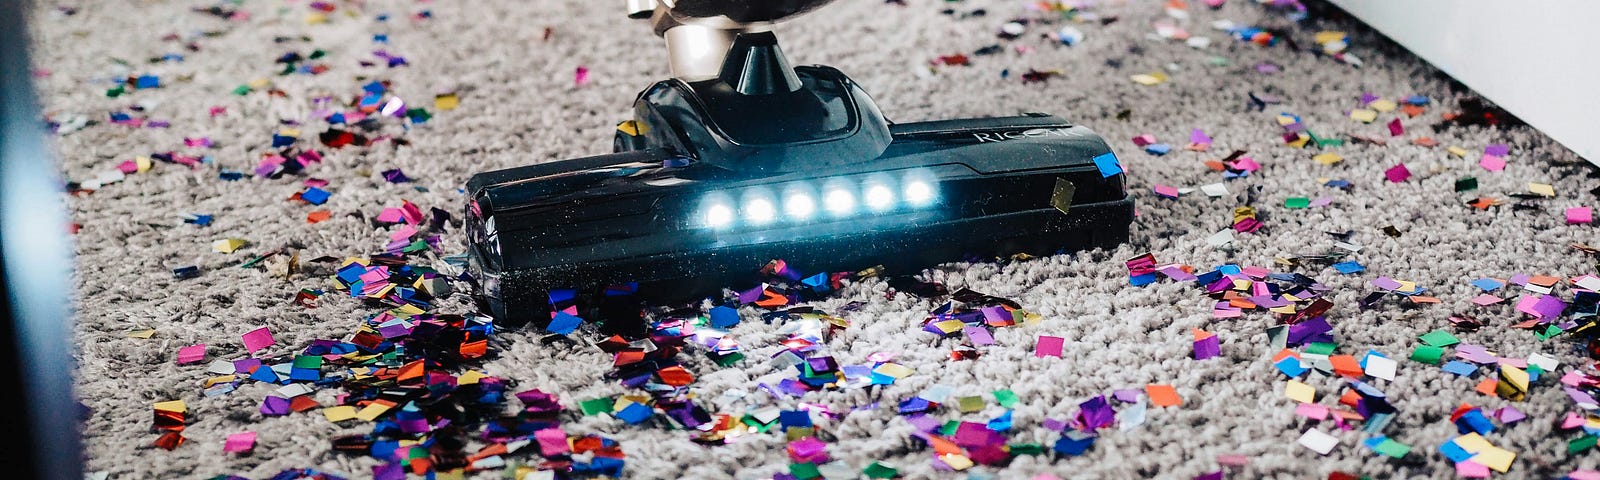 Image of a vacuum cleaner vacuuming many pieces of colorful confetti on a carpet.